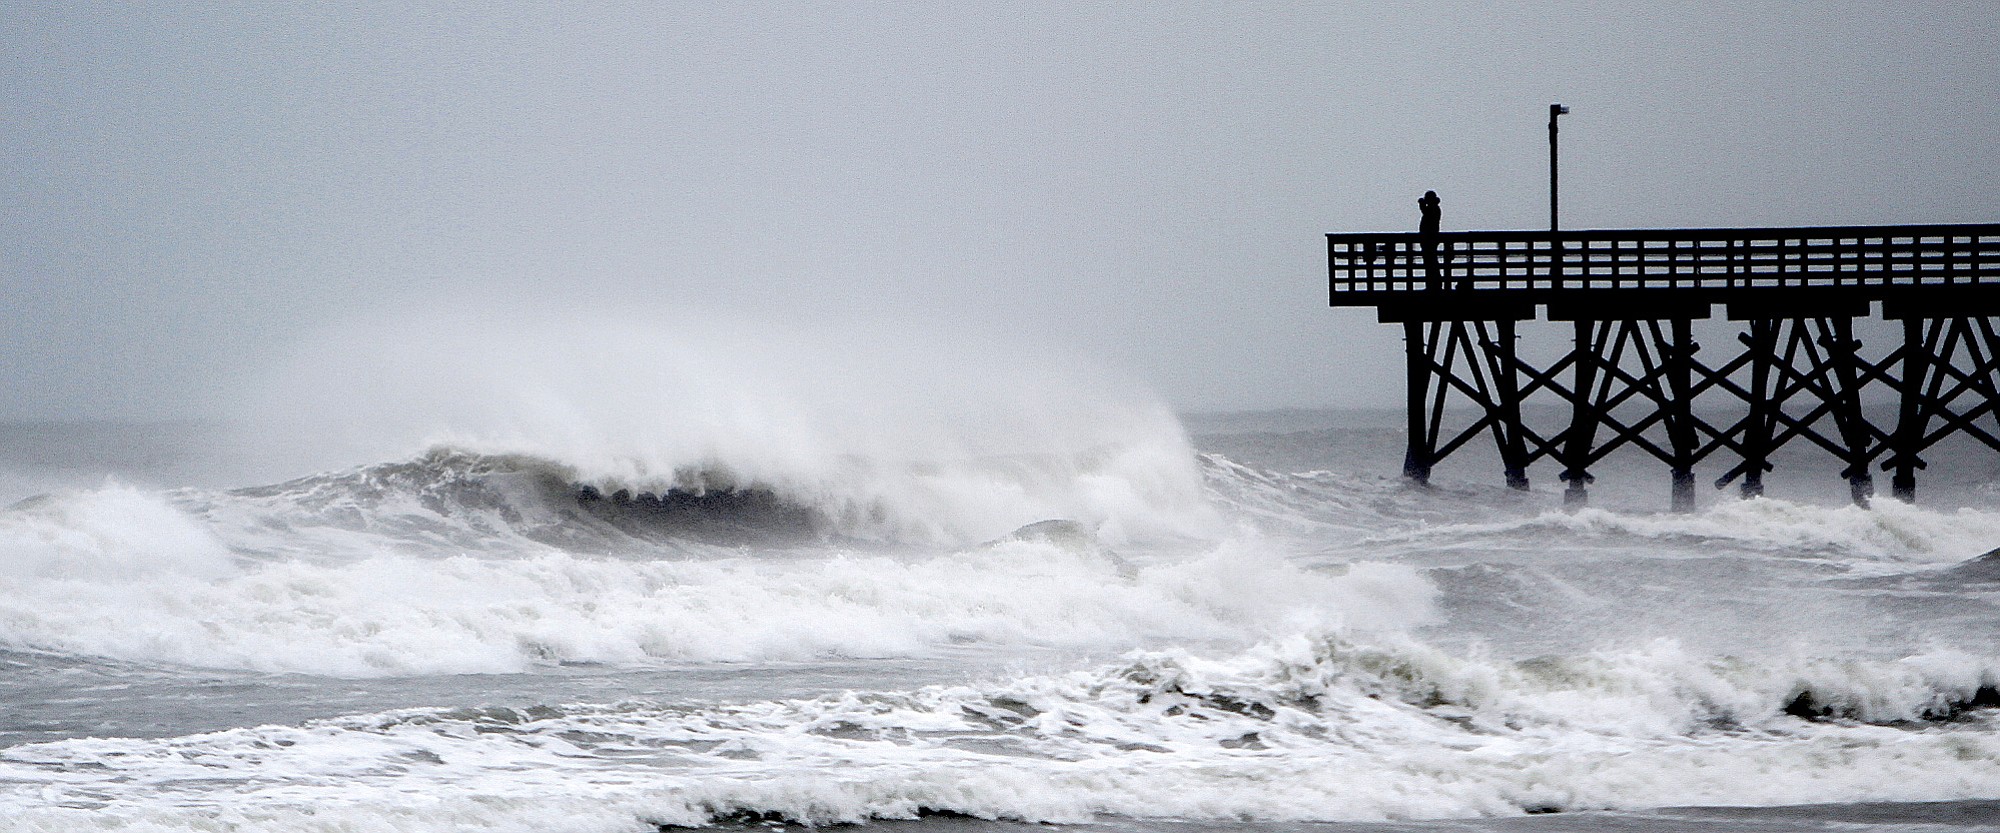 A person stands on the end of the pier Thursday in Cherry Grove Beach, S.C.